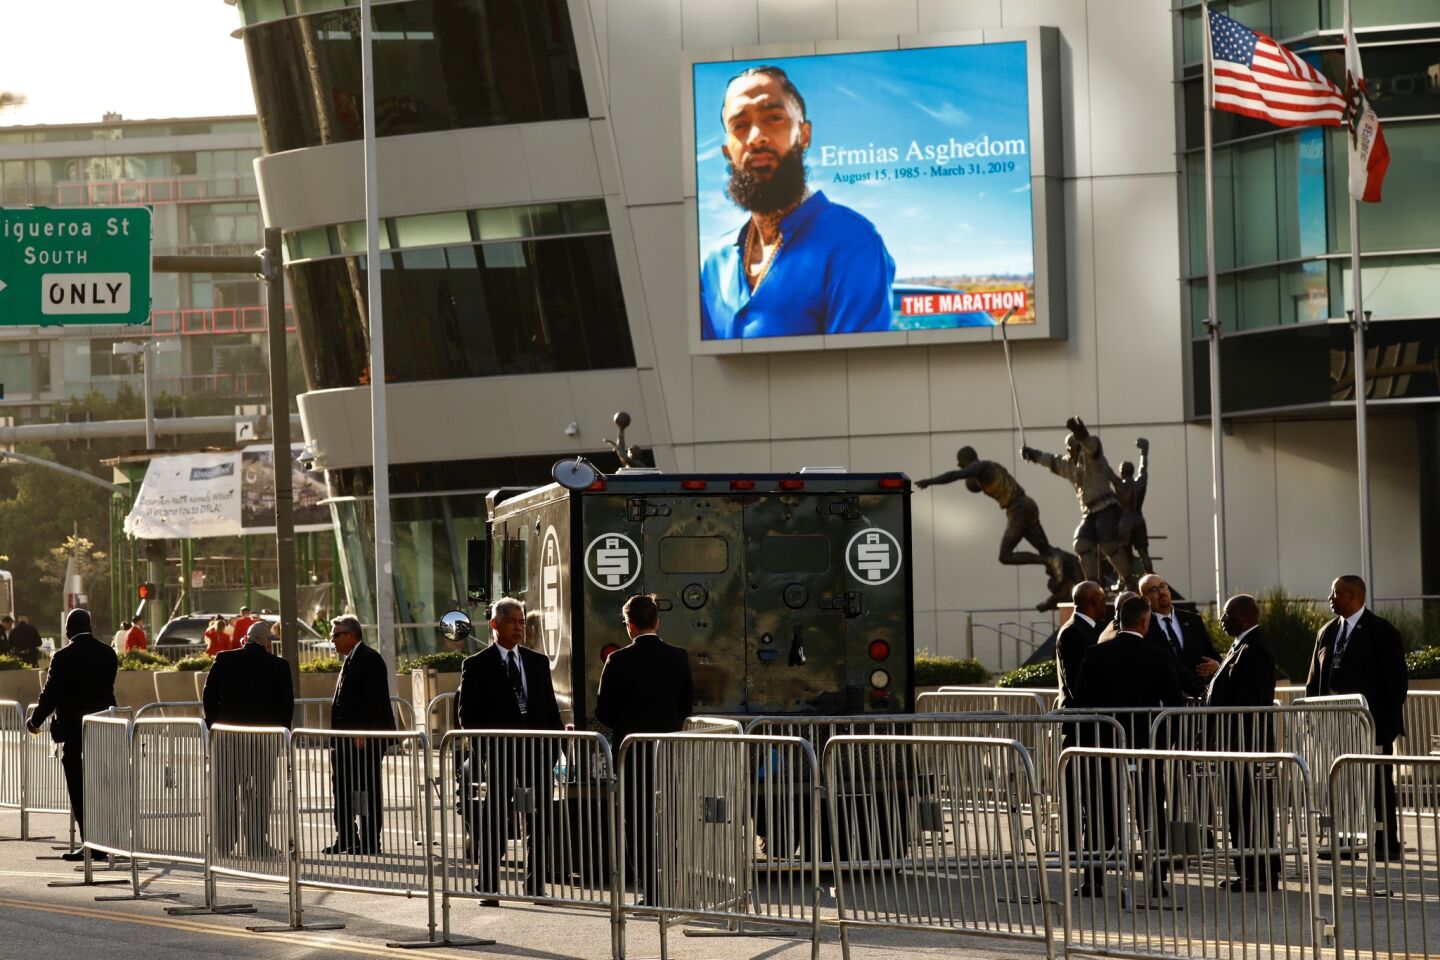 Security is in place at Staples Center ahead of a memorial for slain rapper Nipsey Hussle.